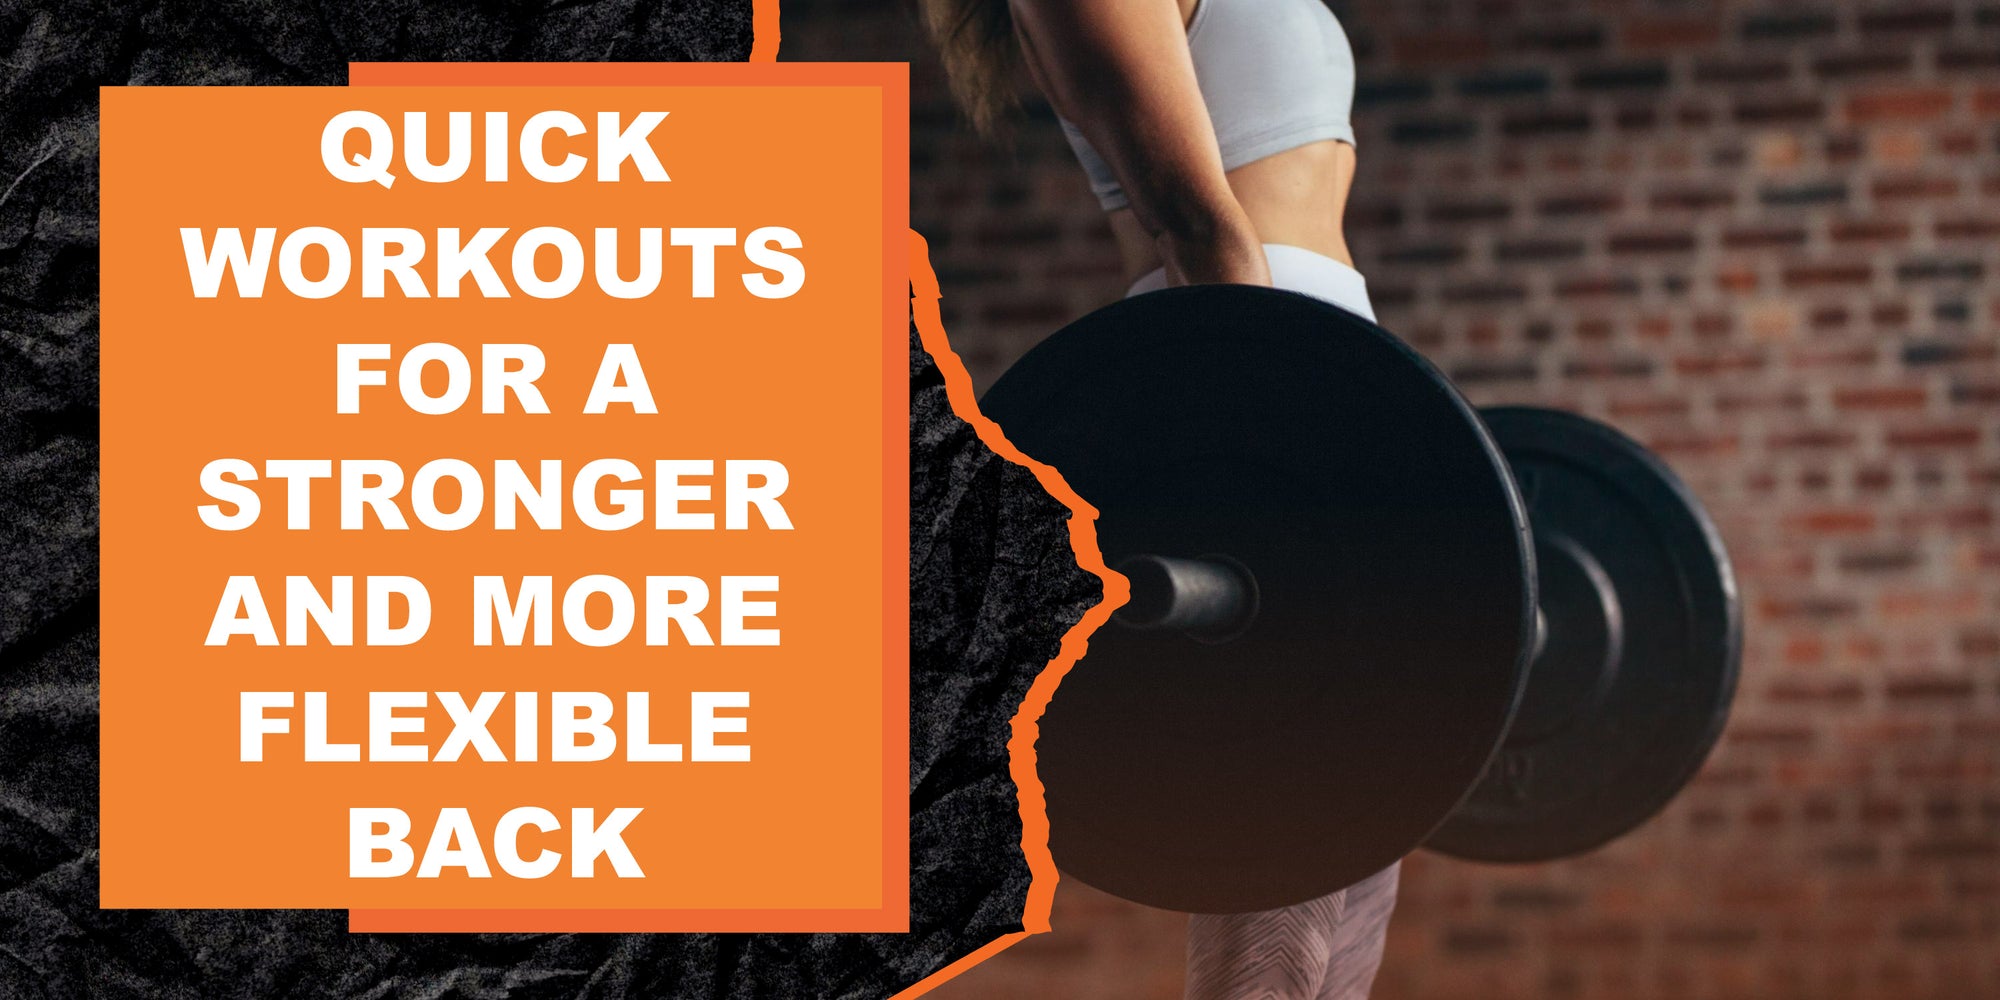 Quick Workouts for a Stronger and More Flexible Back